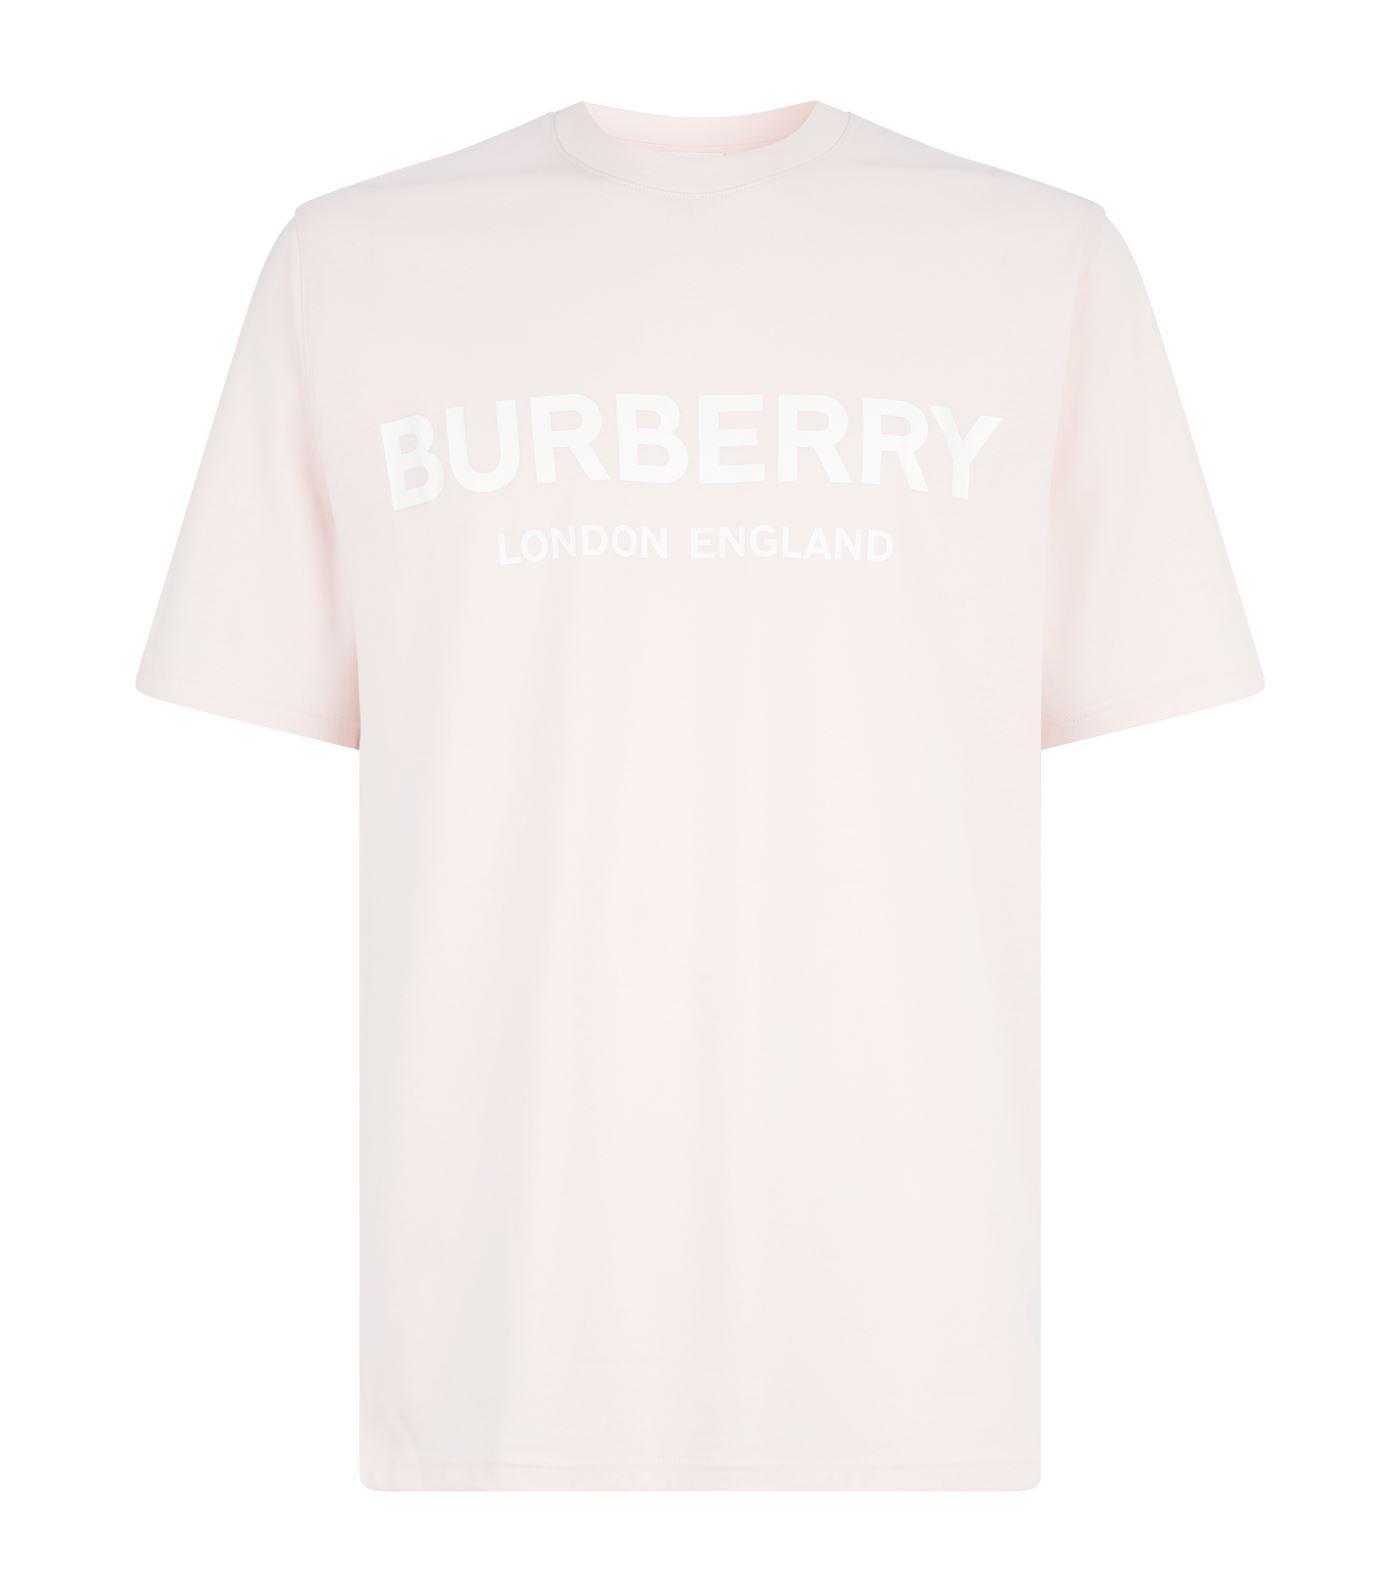 Burberry Logo Print Cotton T-shirt in Pink for Men - Lyst